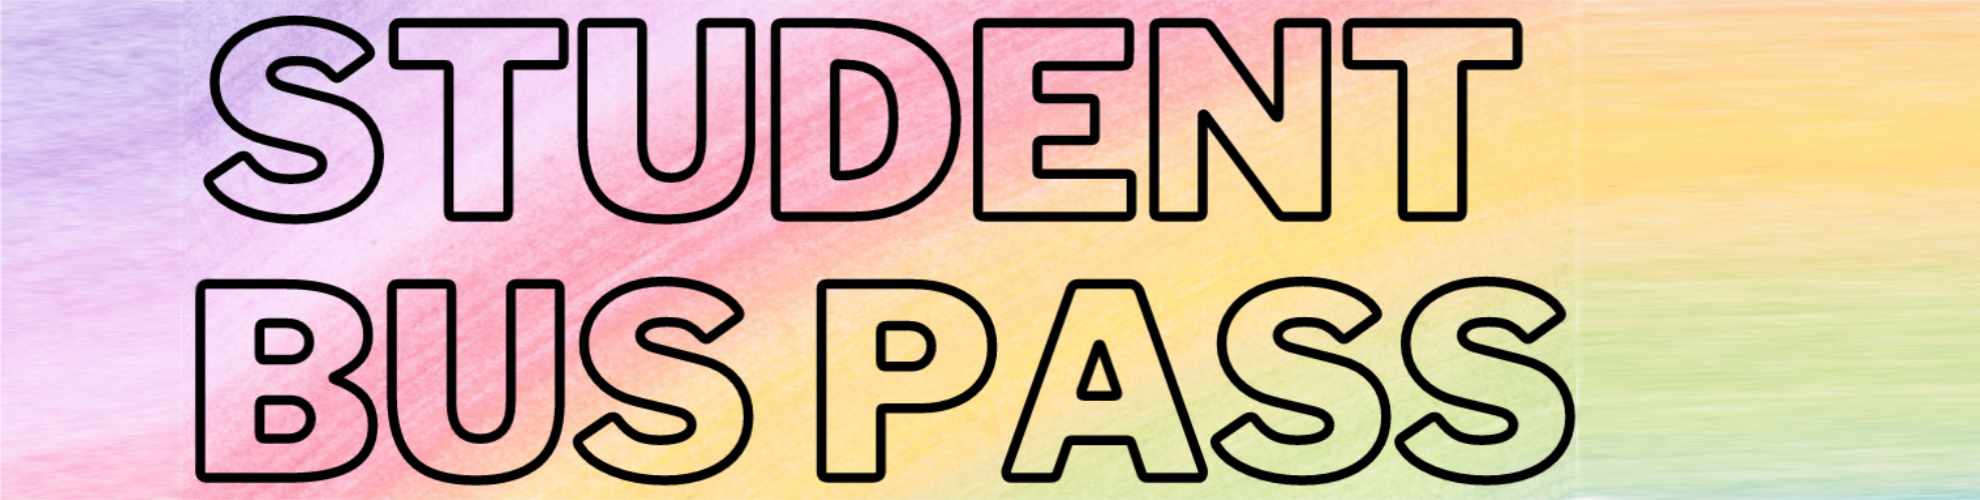 student-bus-passes-available-from-freedom-transit-transportation